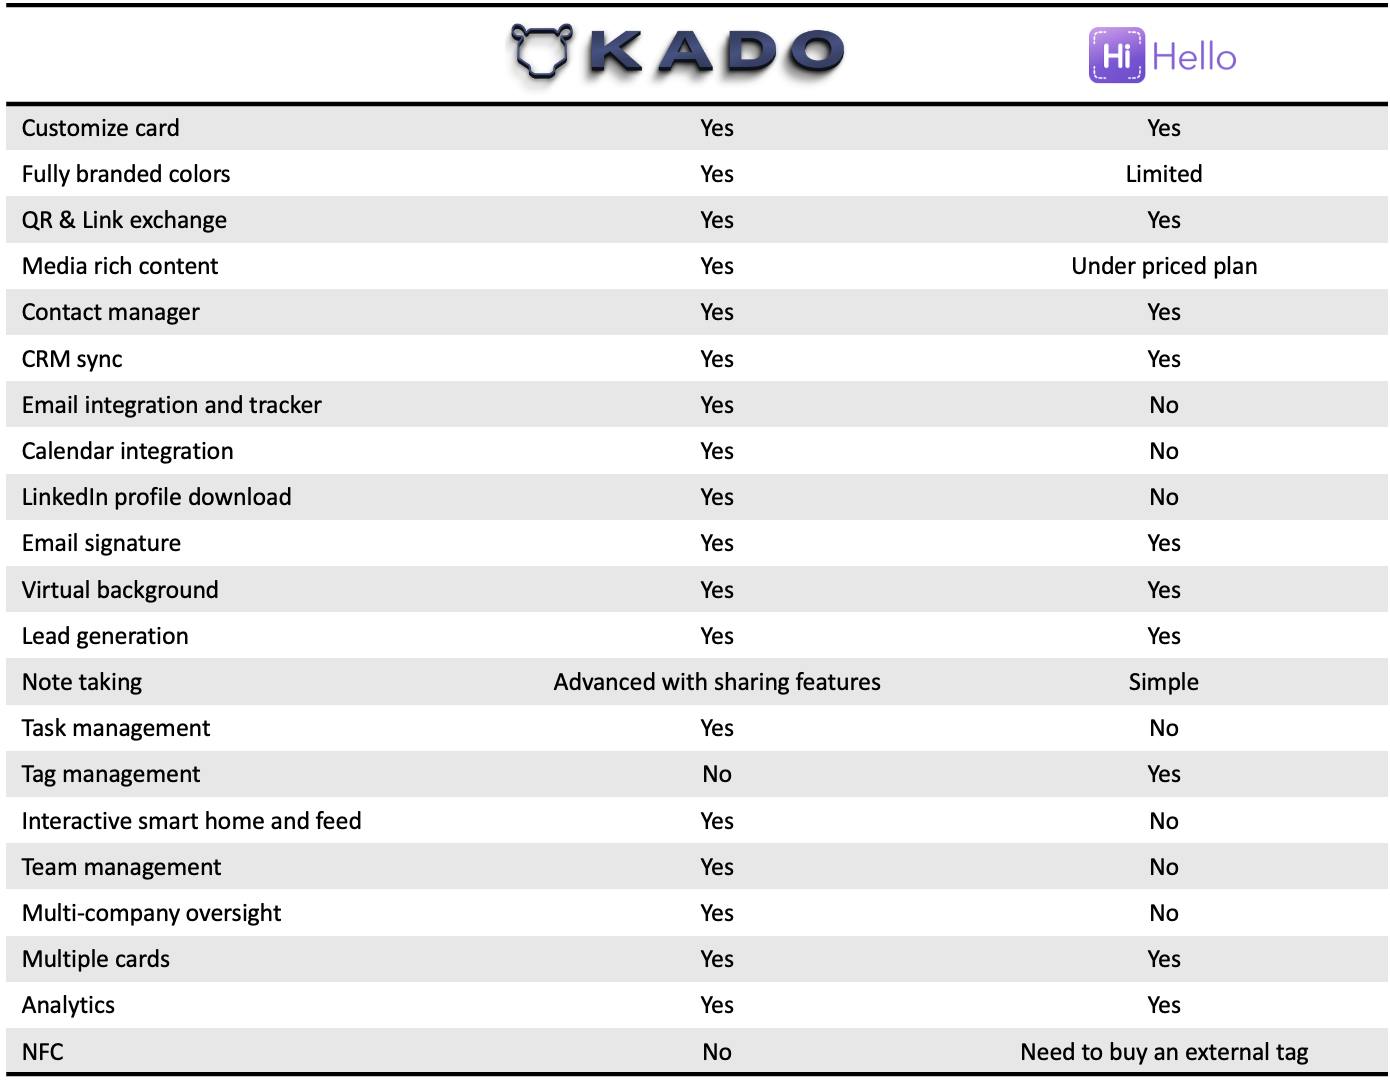 Table comparing KADO features to HiHello